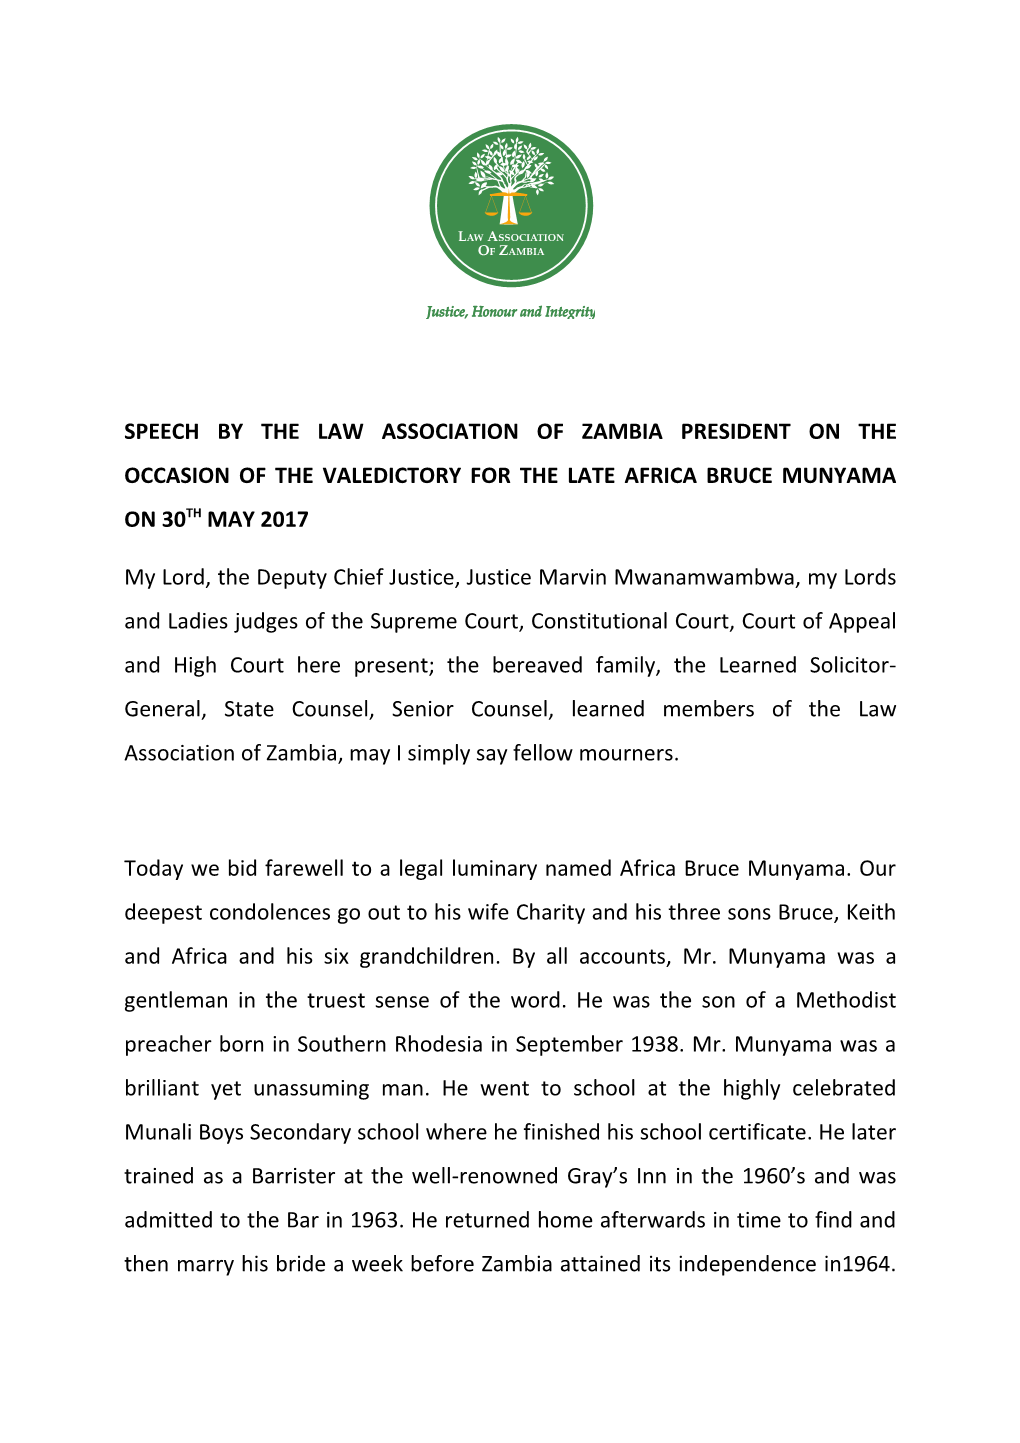 Speech by the Law Association of Zambia President on the Occasion of the Valedictory For